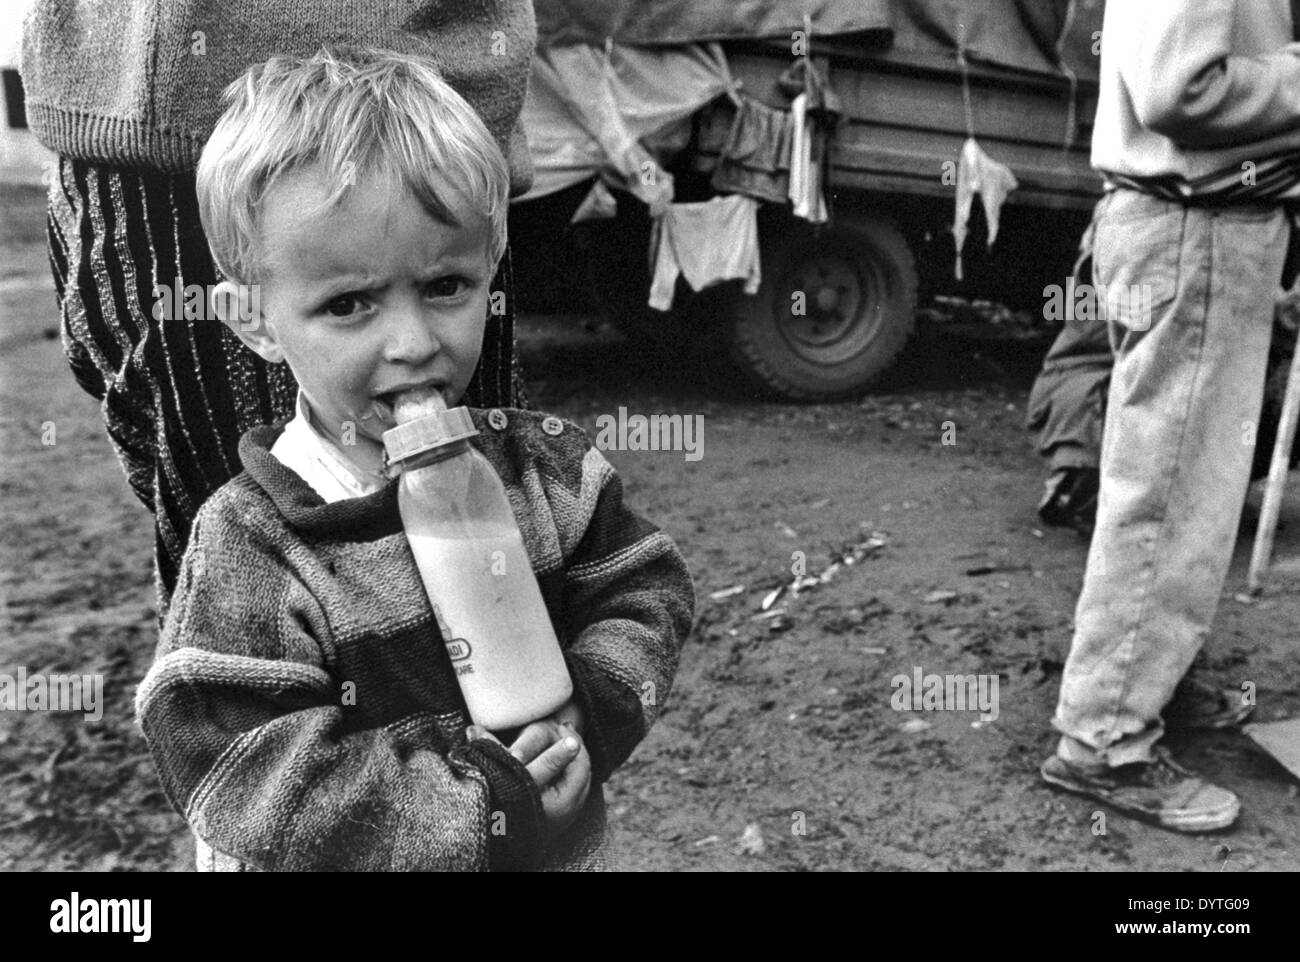 A refugee child from Kosovo in Albania Stock Photo